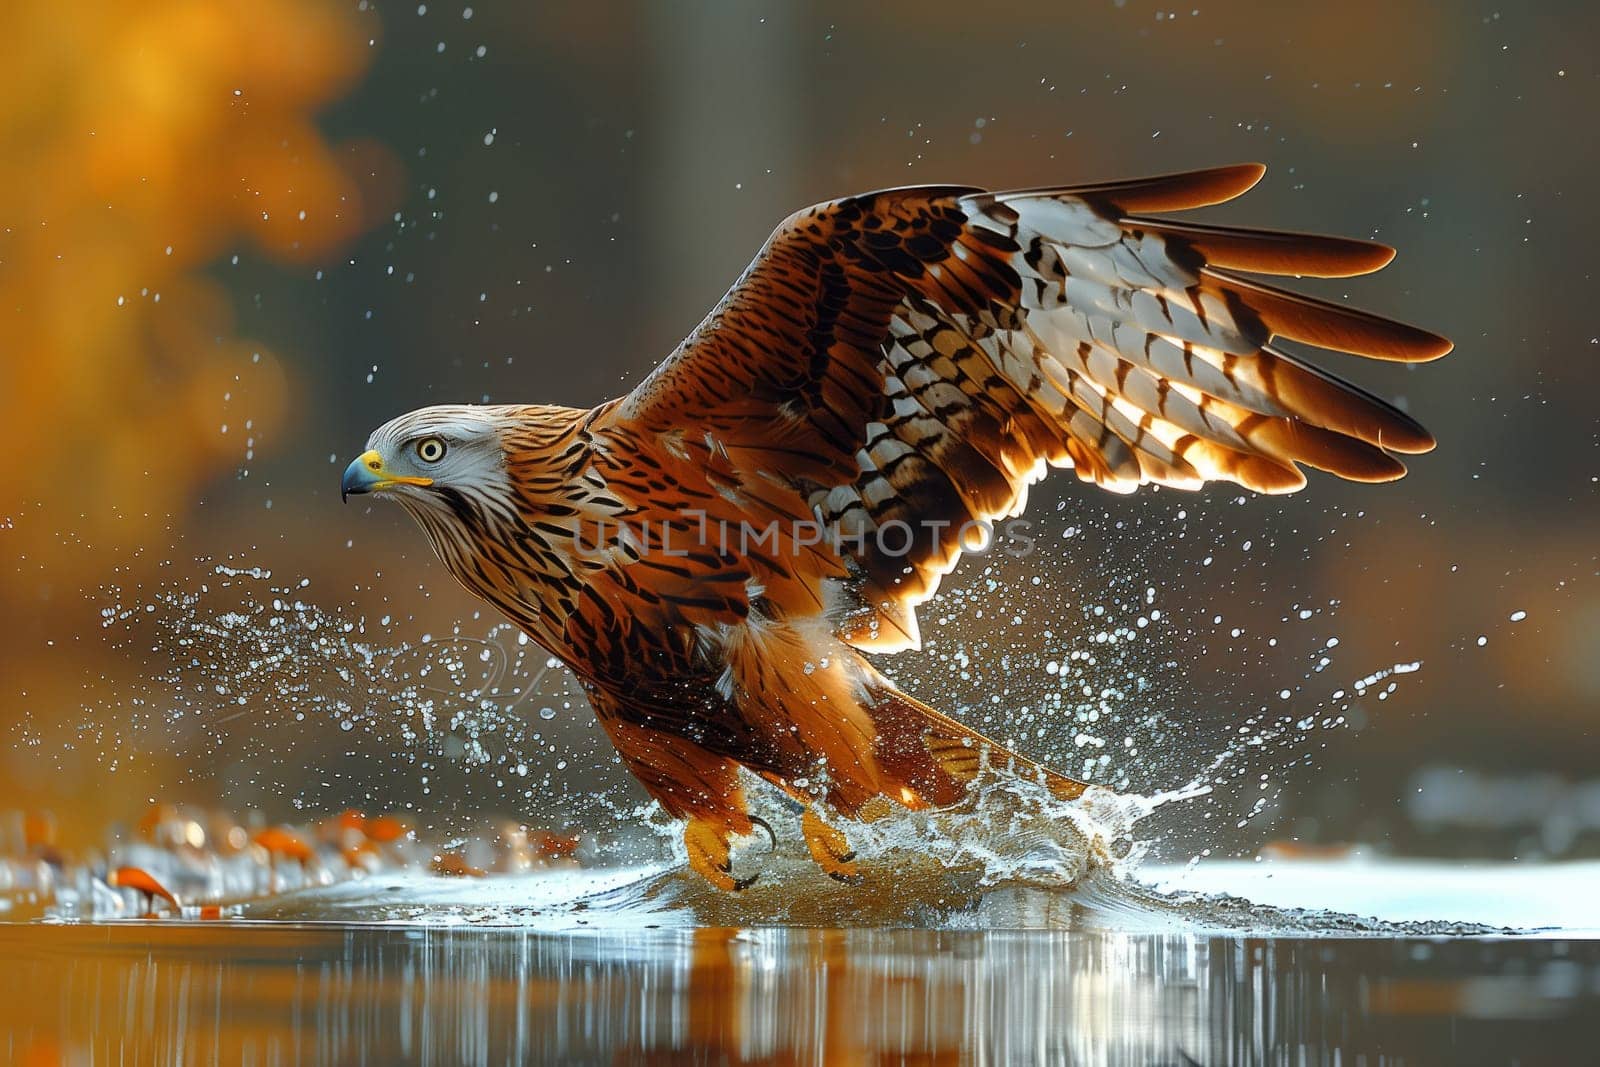 A Falconiformes bird soars over liquid water in nature by richwolf